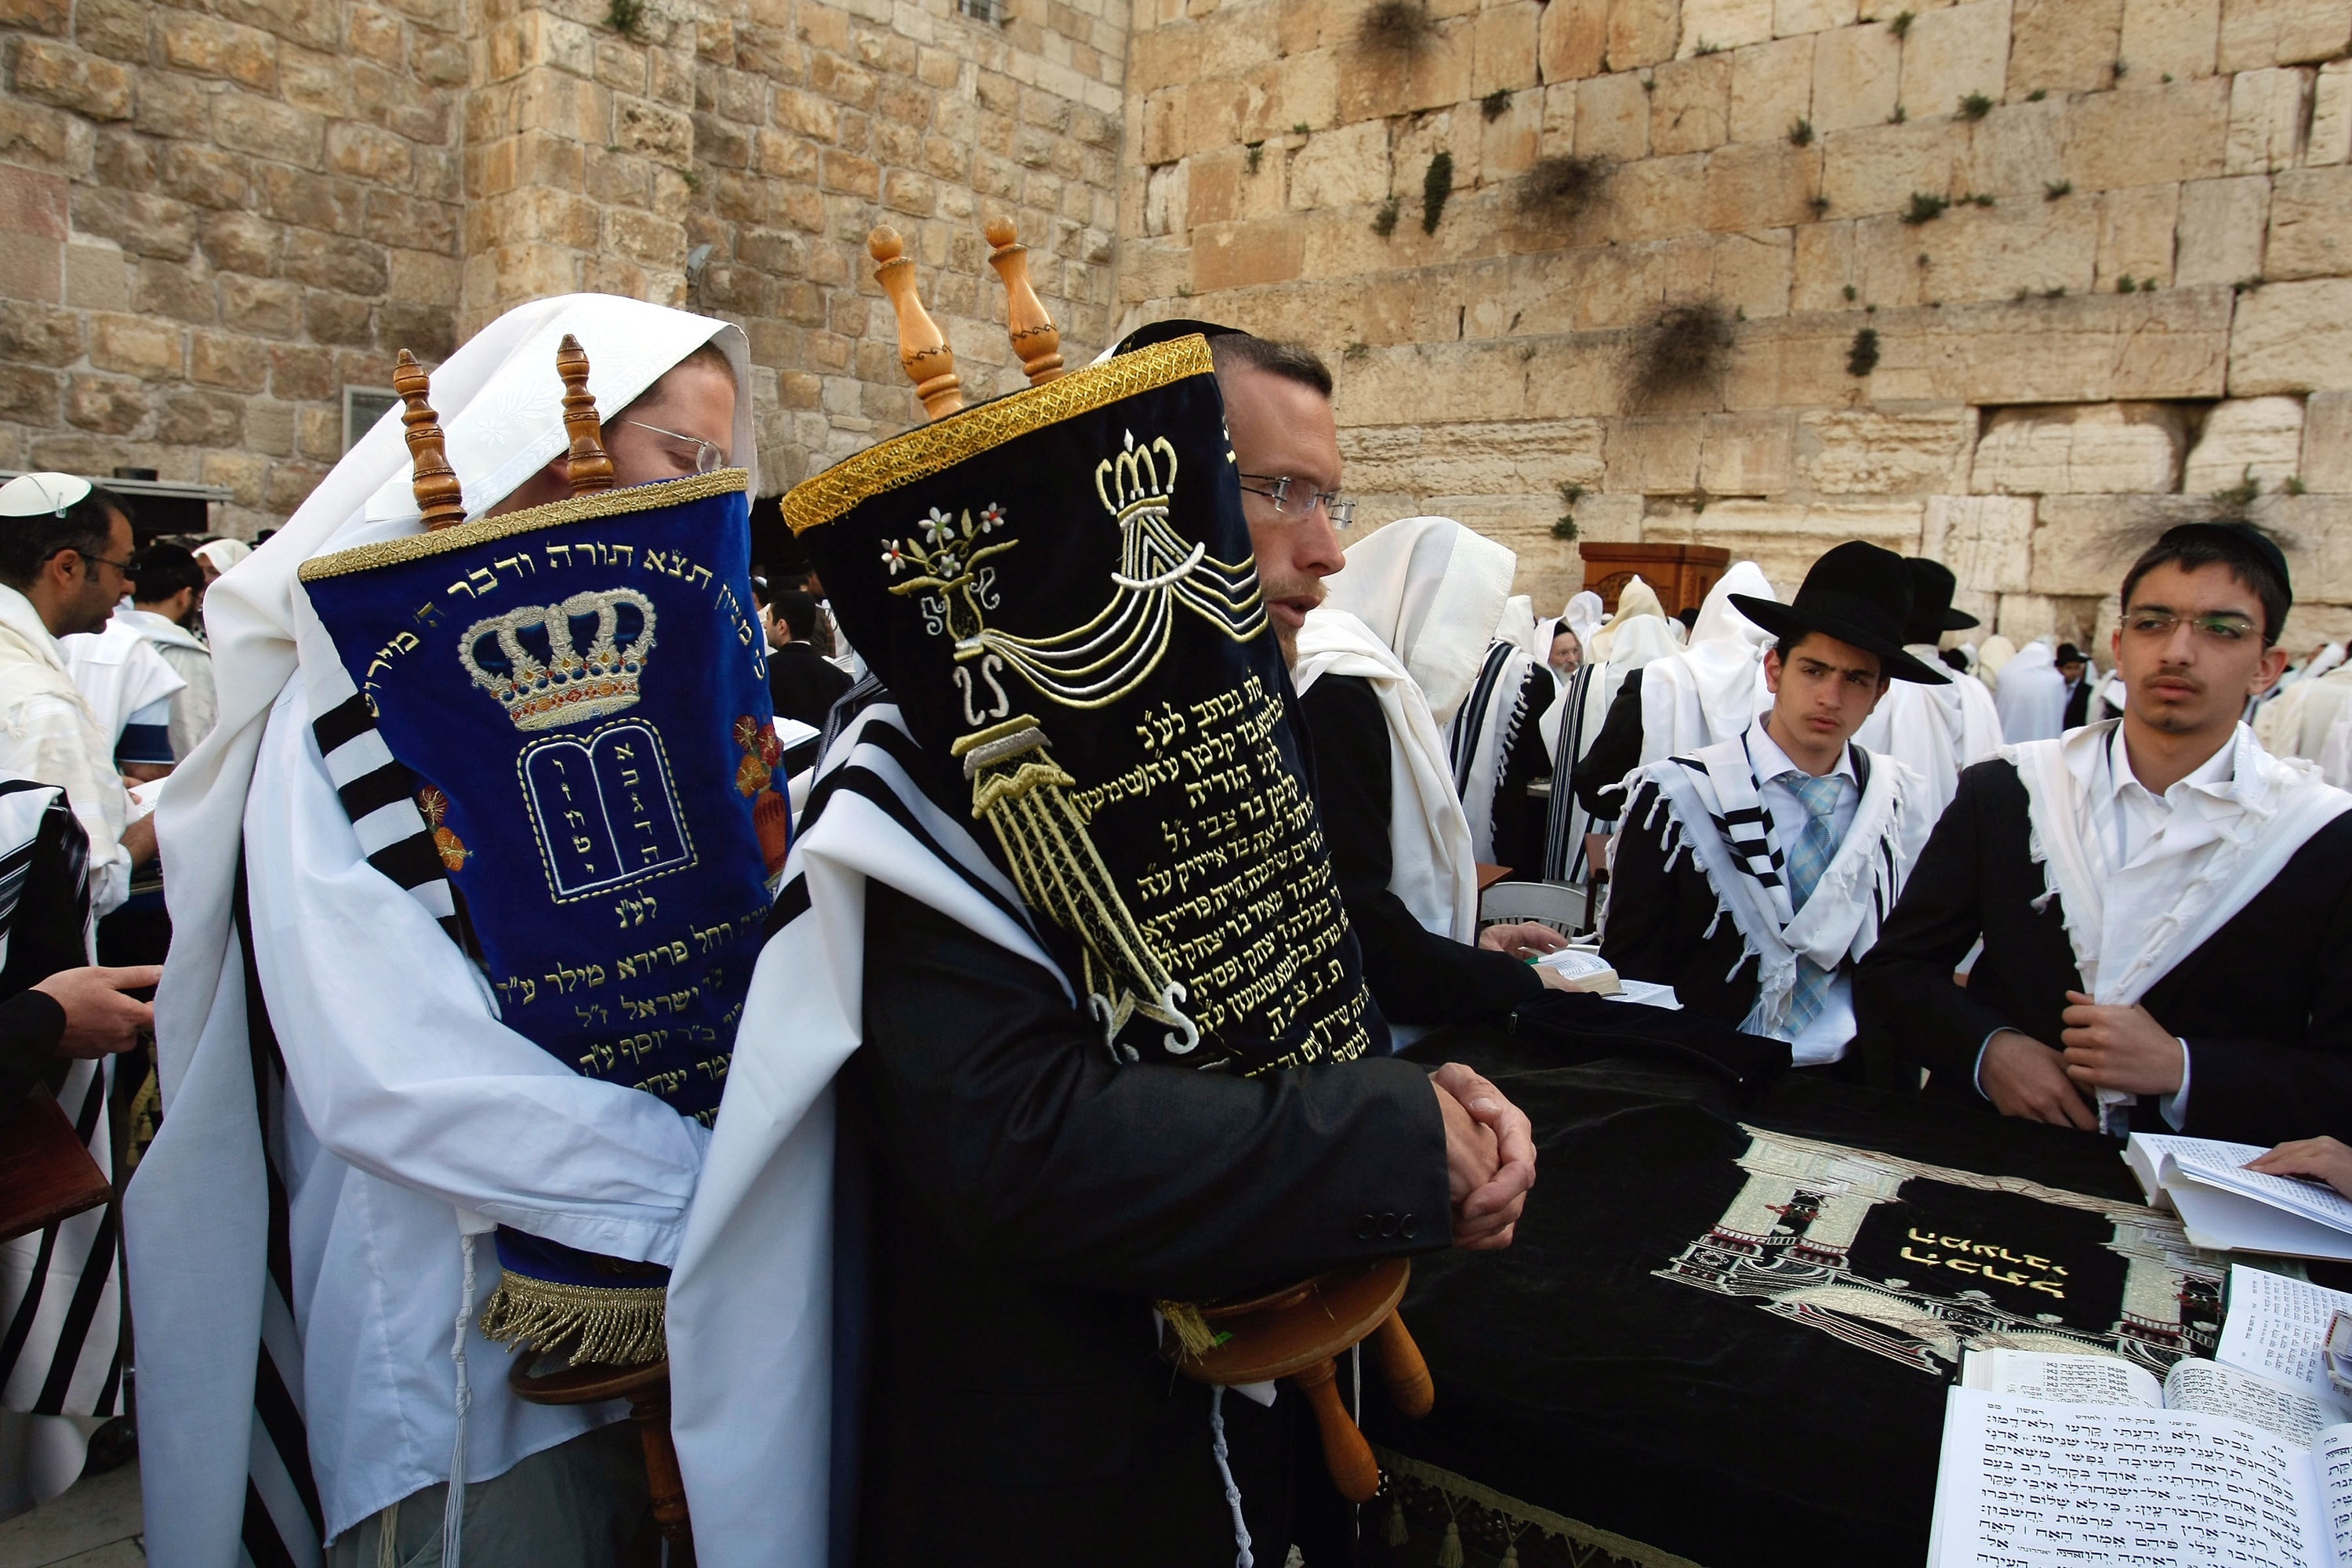 David Silverman/Getty Images. Jewish men carry Torah scrolls during morning prayers at the Western Wall on April 13, 2009 in Jerusalem's Old City.